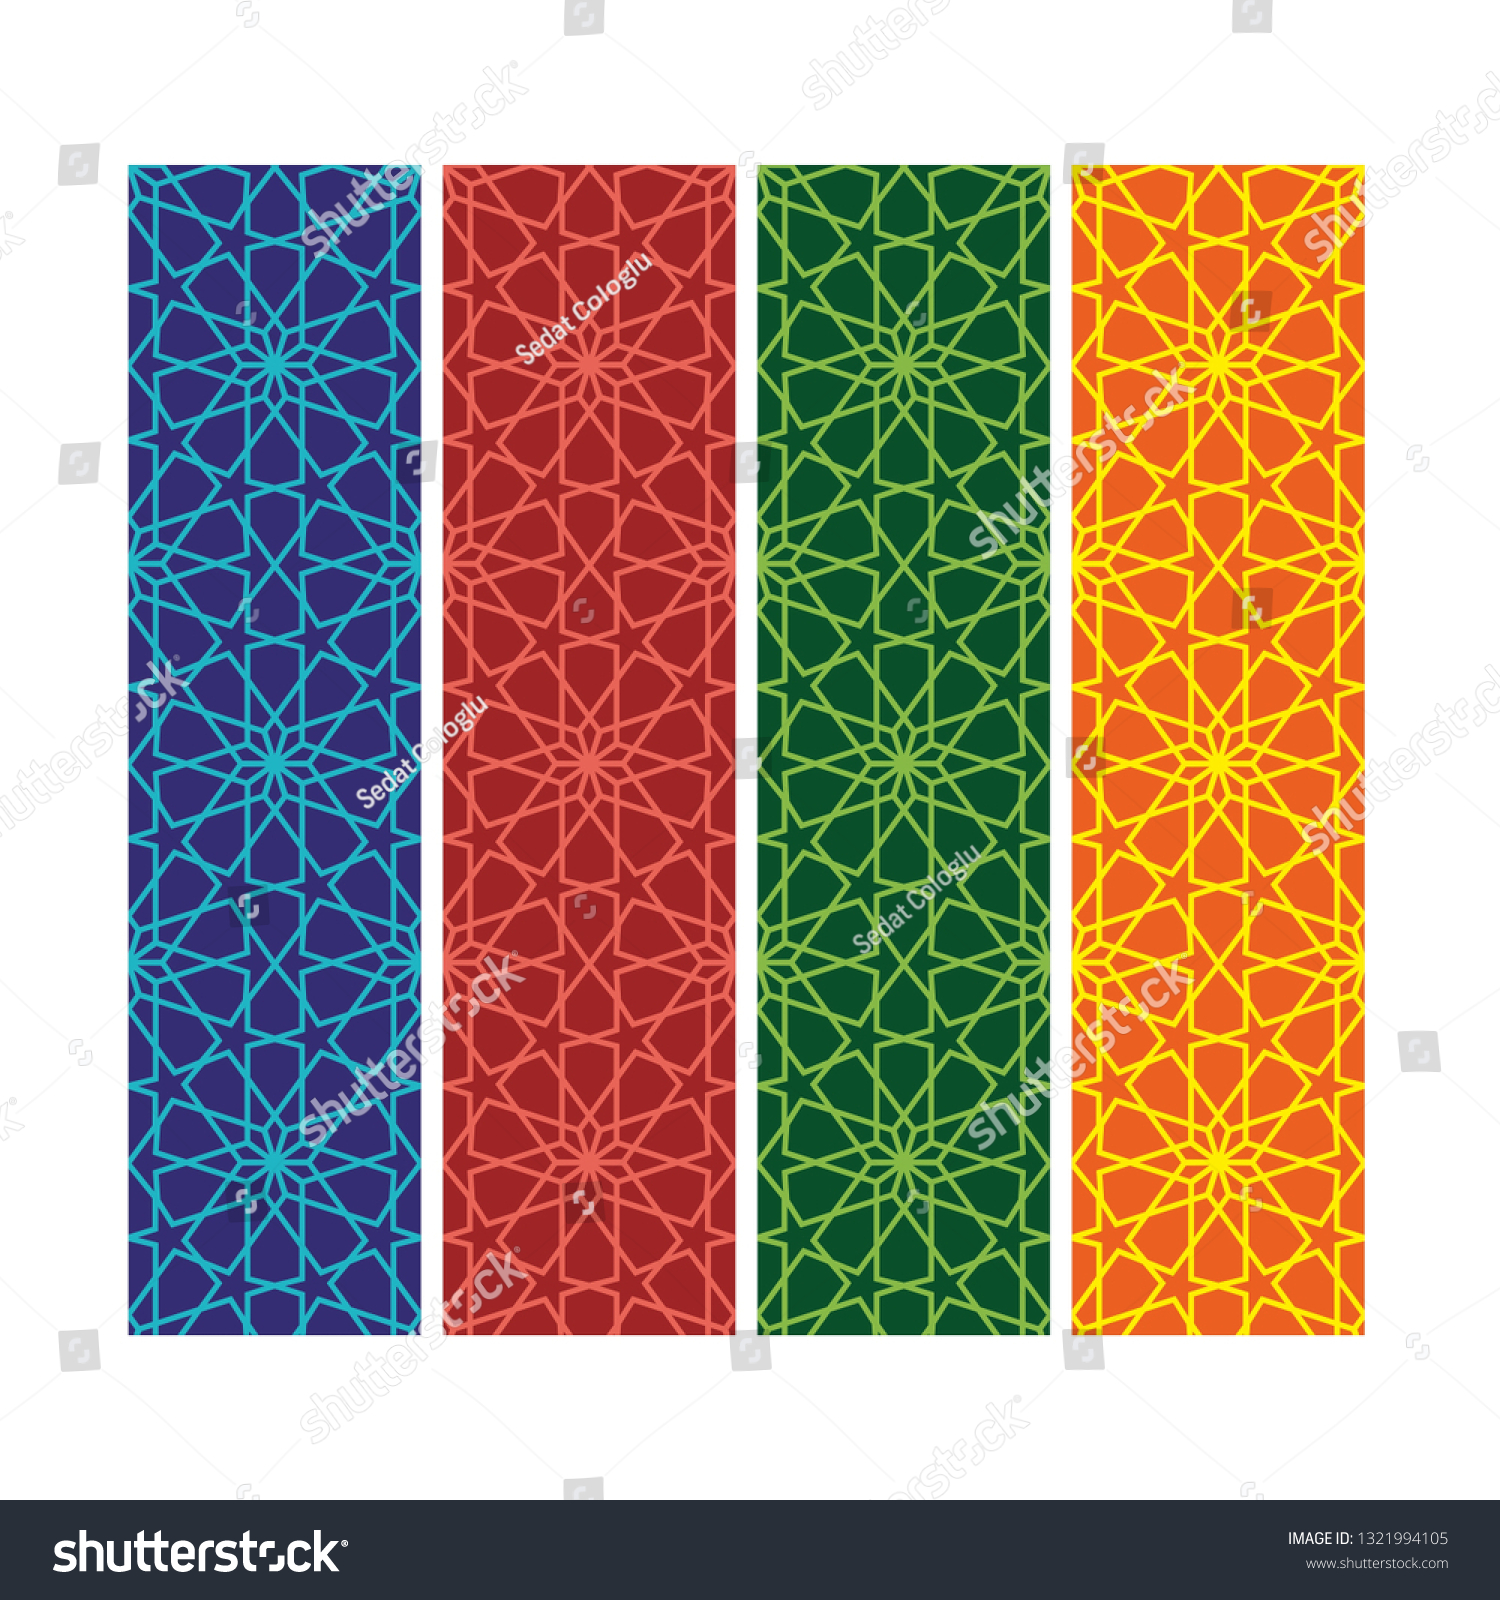 stock-vector-vector-bookmark-cards-ottoman-motif-style-it-can-be-used-as-wall-board-banner-icon-wallpaper-1321994105